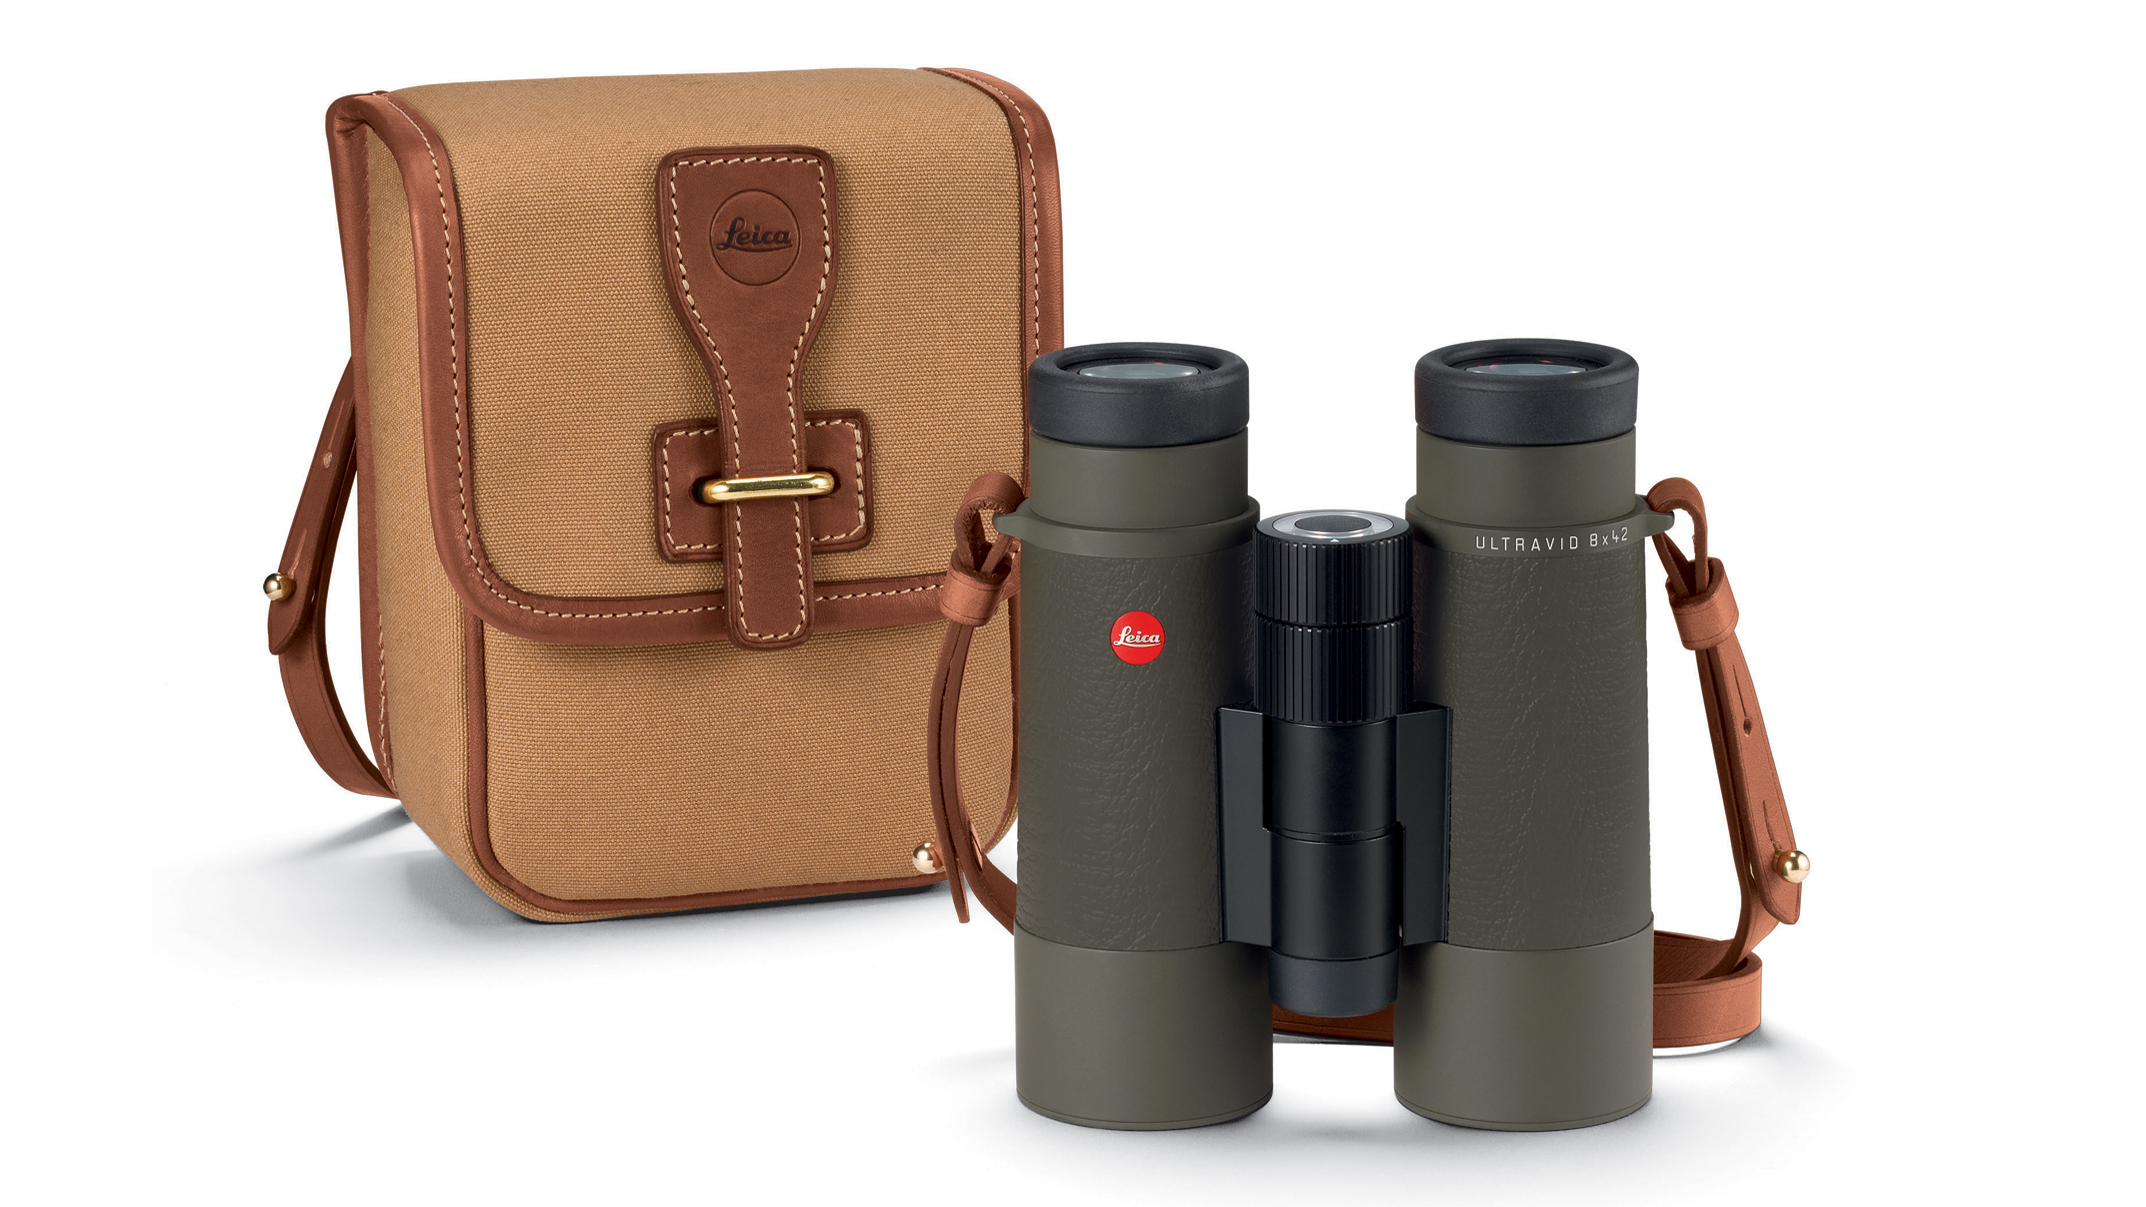 Leica binocular deals: The lowest prices on top-tier models